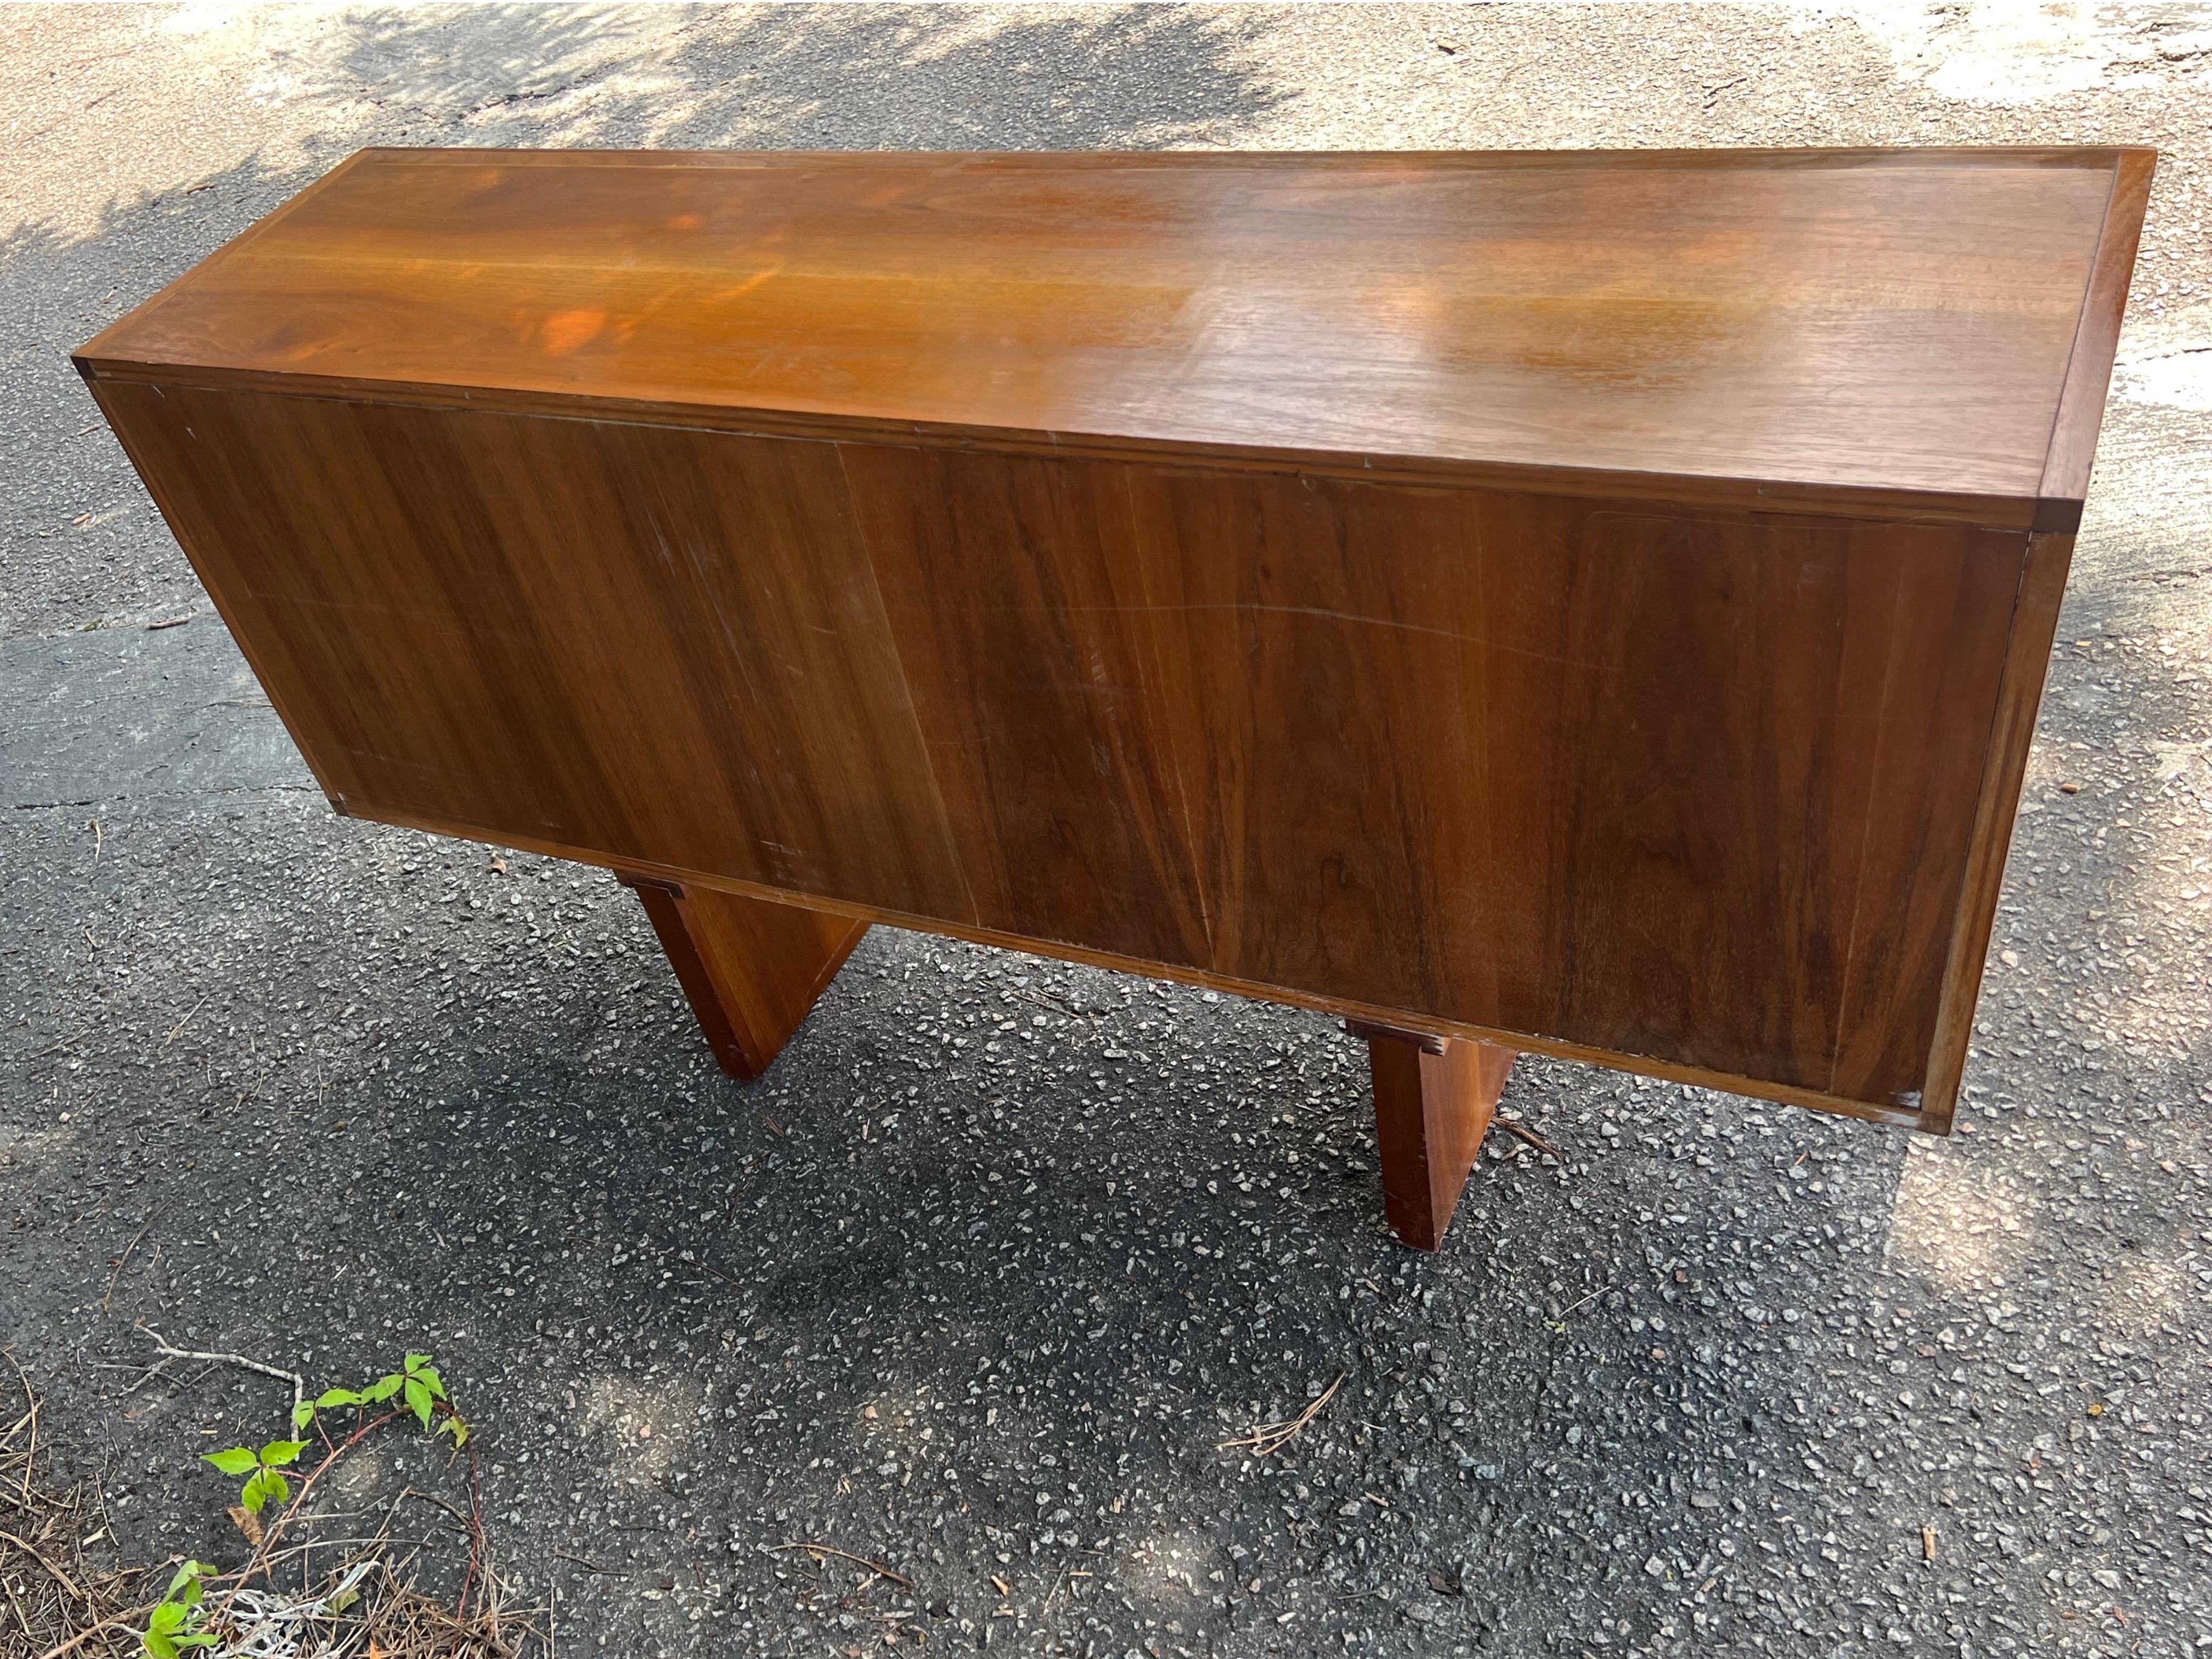 Lovely vintage Mid Century Modern teak bookcase/display or media console with sliding glass doors.   Would look great as an entryway console or media cabinet.   Oh and the best part is that it’s finished on the back.